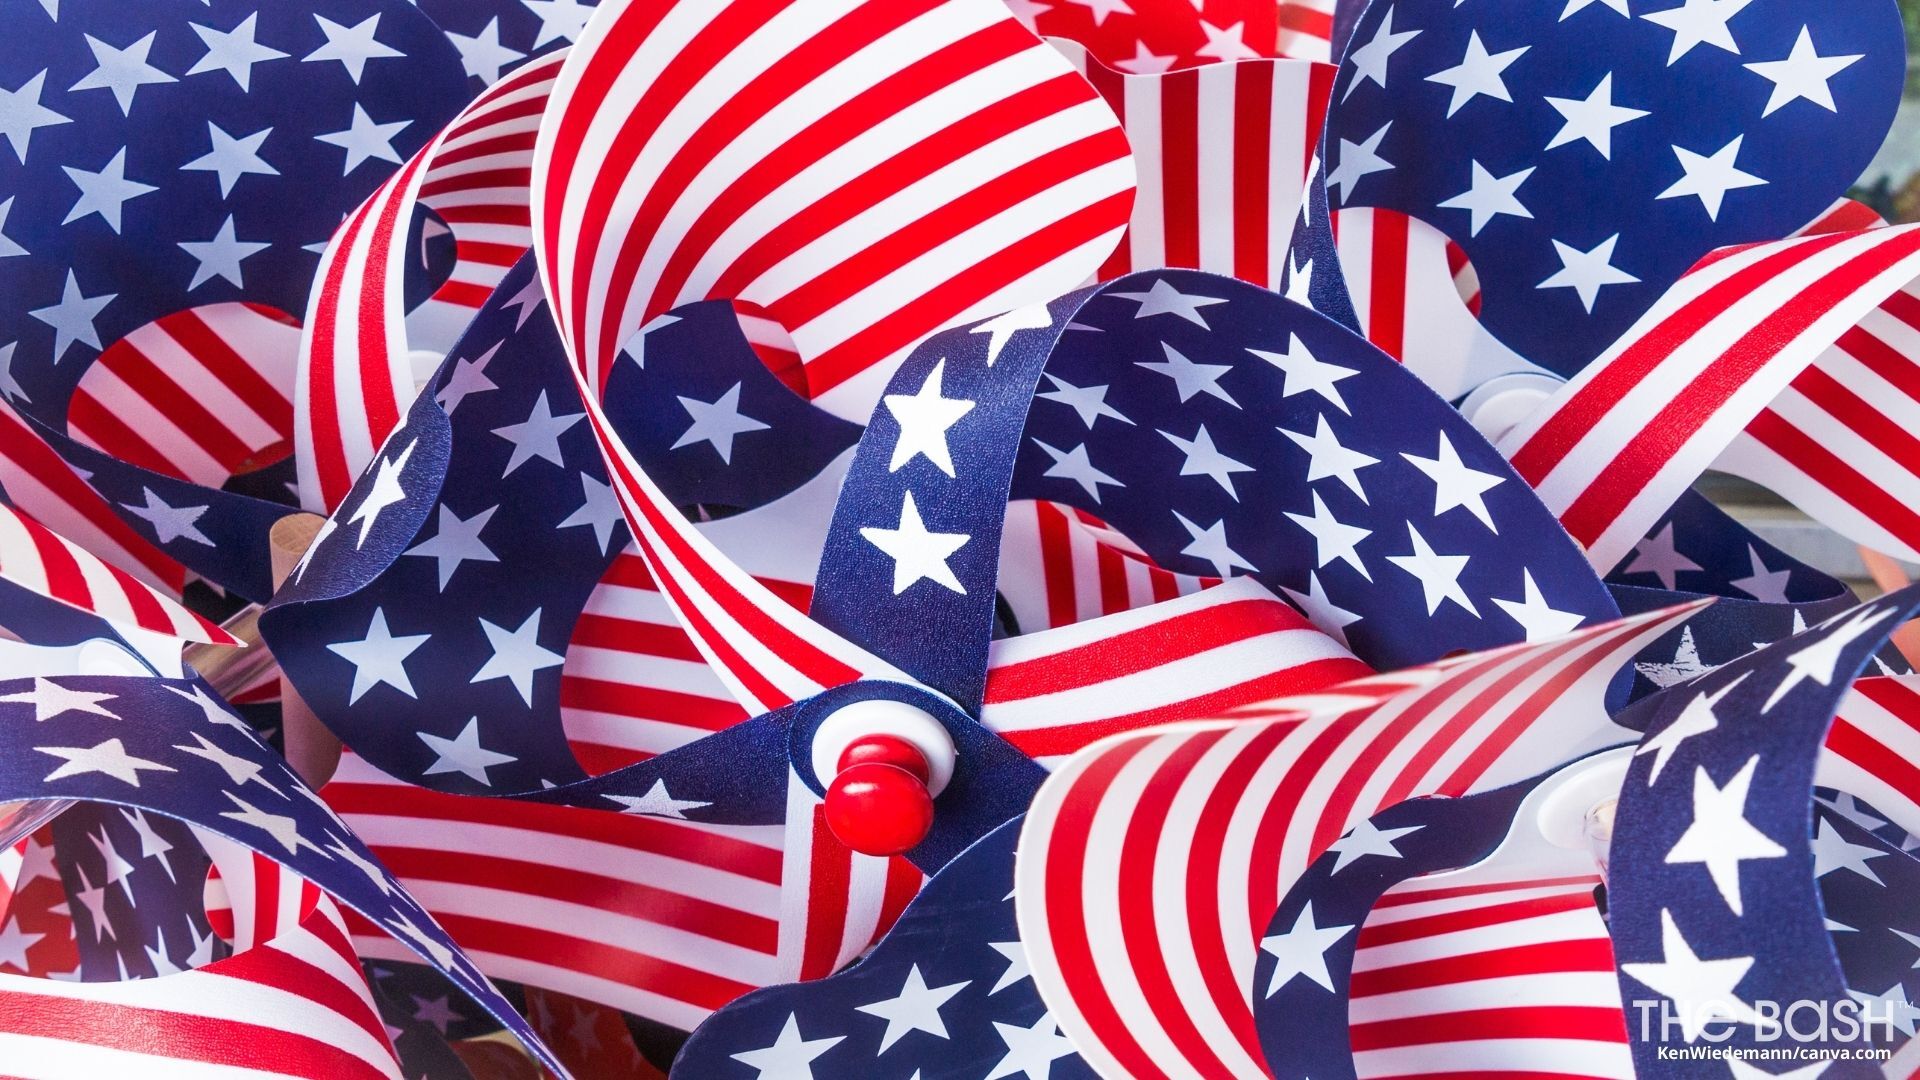 30 Festive 4th of July Zoom Backgrounds - Free Download - The Bash